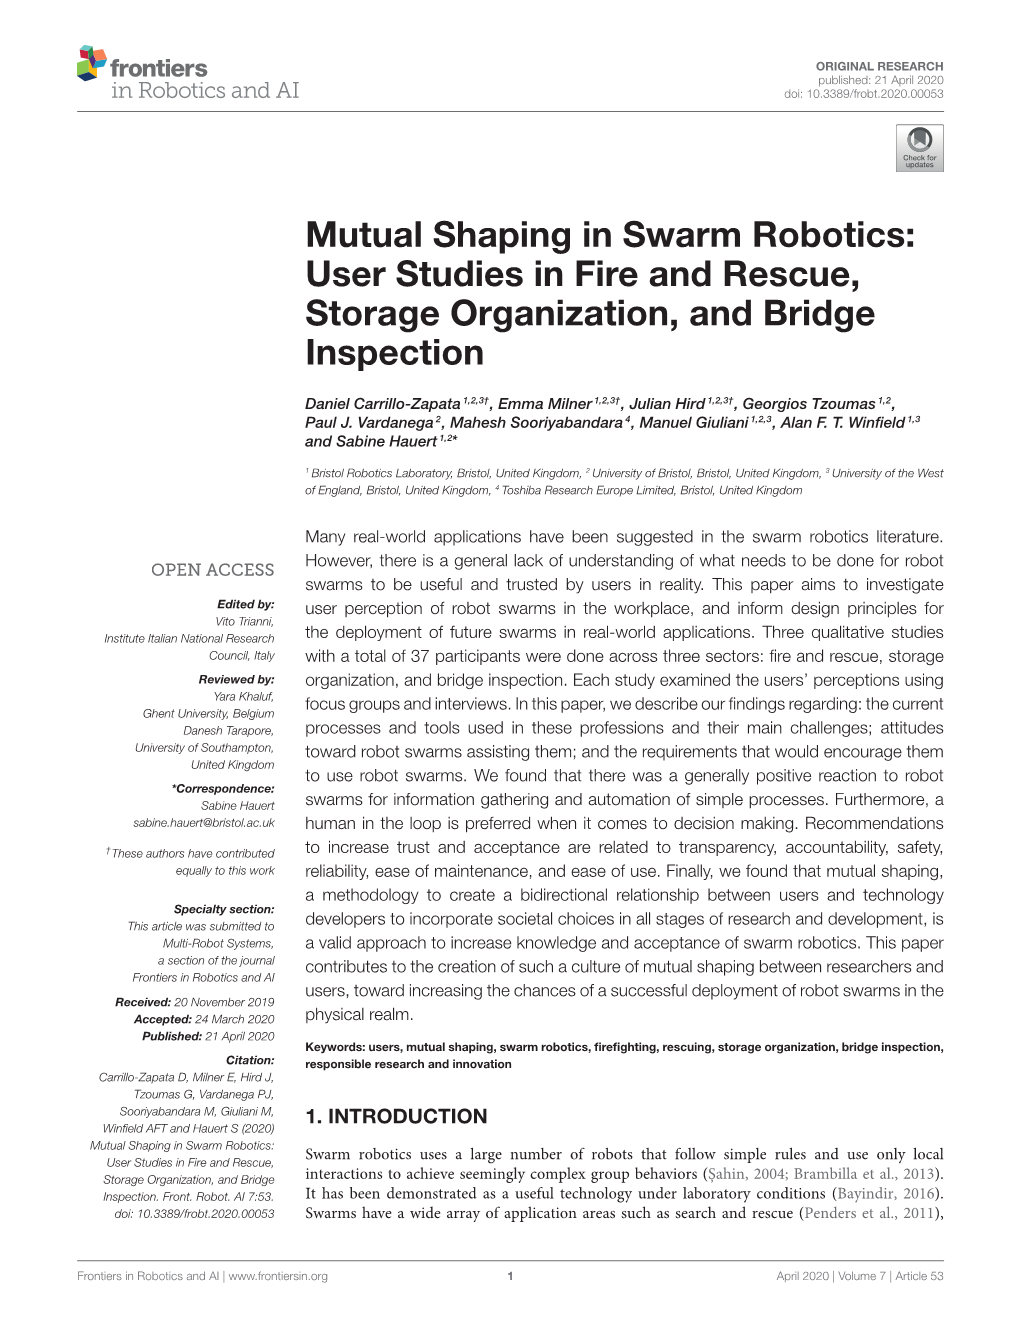 Mutual Shaping in Swarm Robotics: User Studies in Fire and Rescue, Storage Organization, and Bridge Inspection